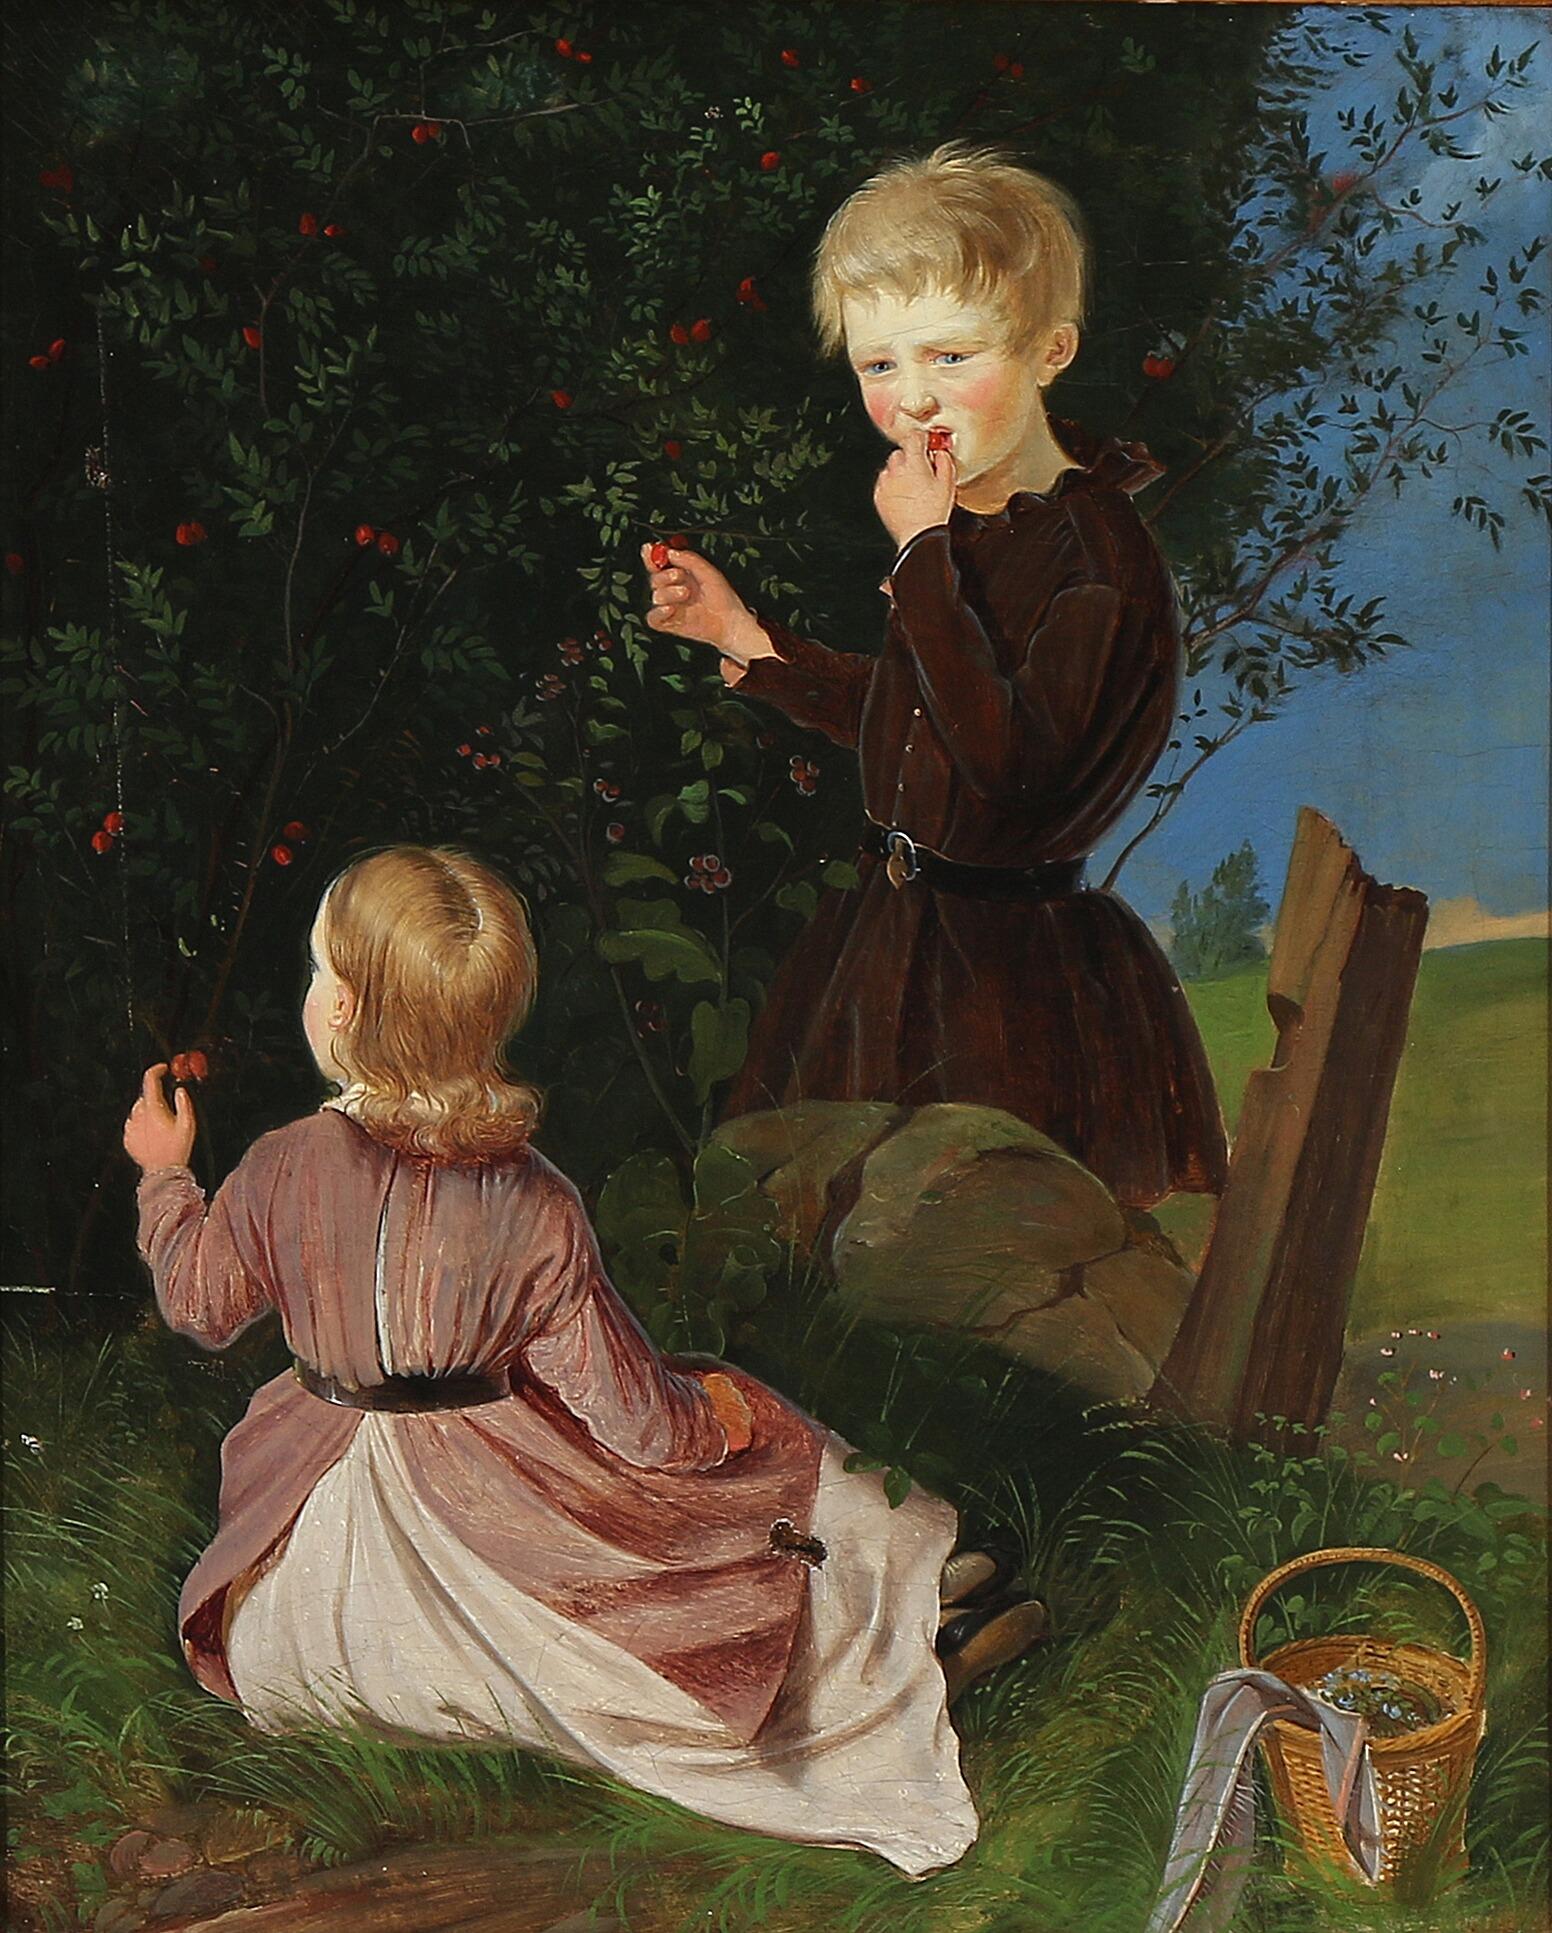 Charming unsigned 19th century painting of two small children picking berries. Oil on canvas. Measures: 16.5